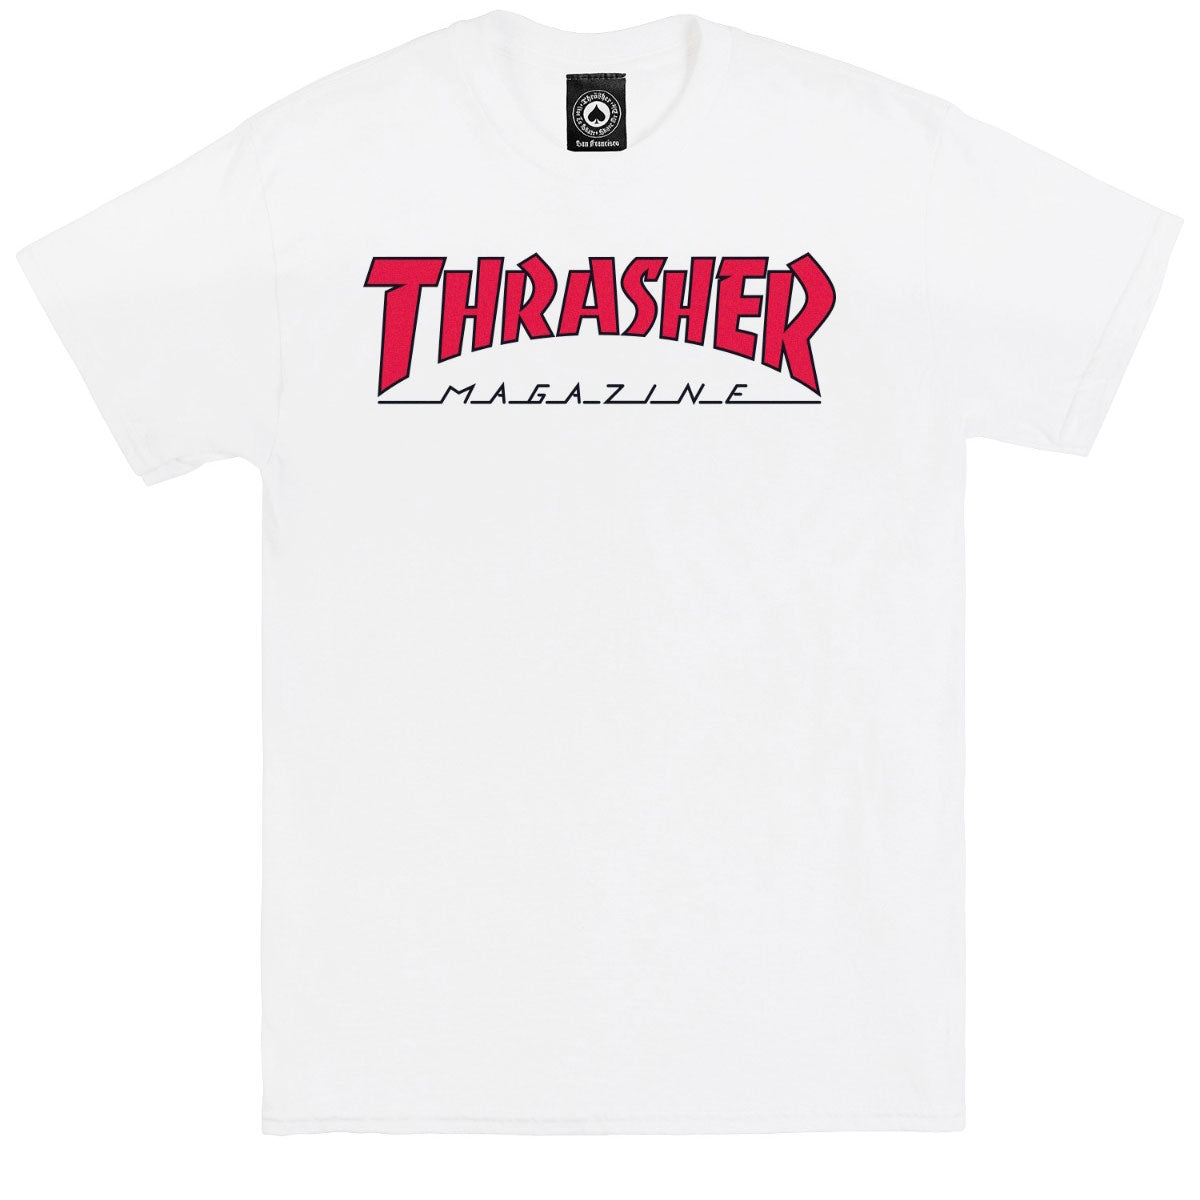 Thrasher Outlined T-Shirt - White/Red image 1